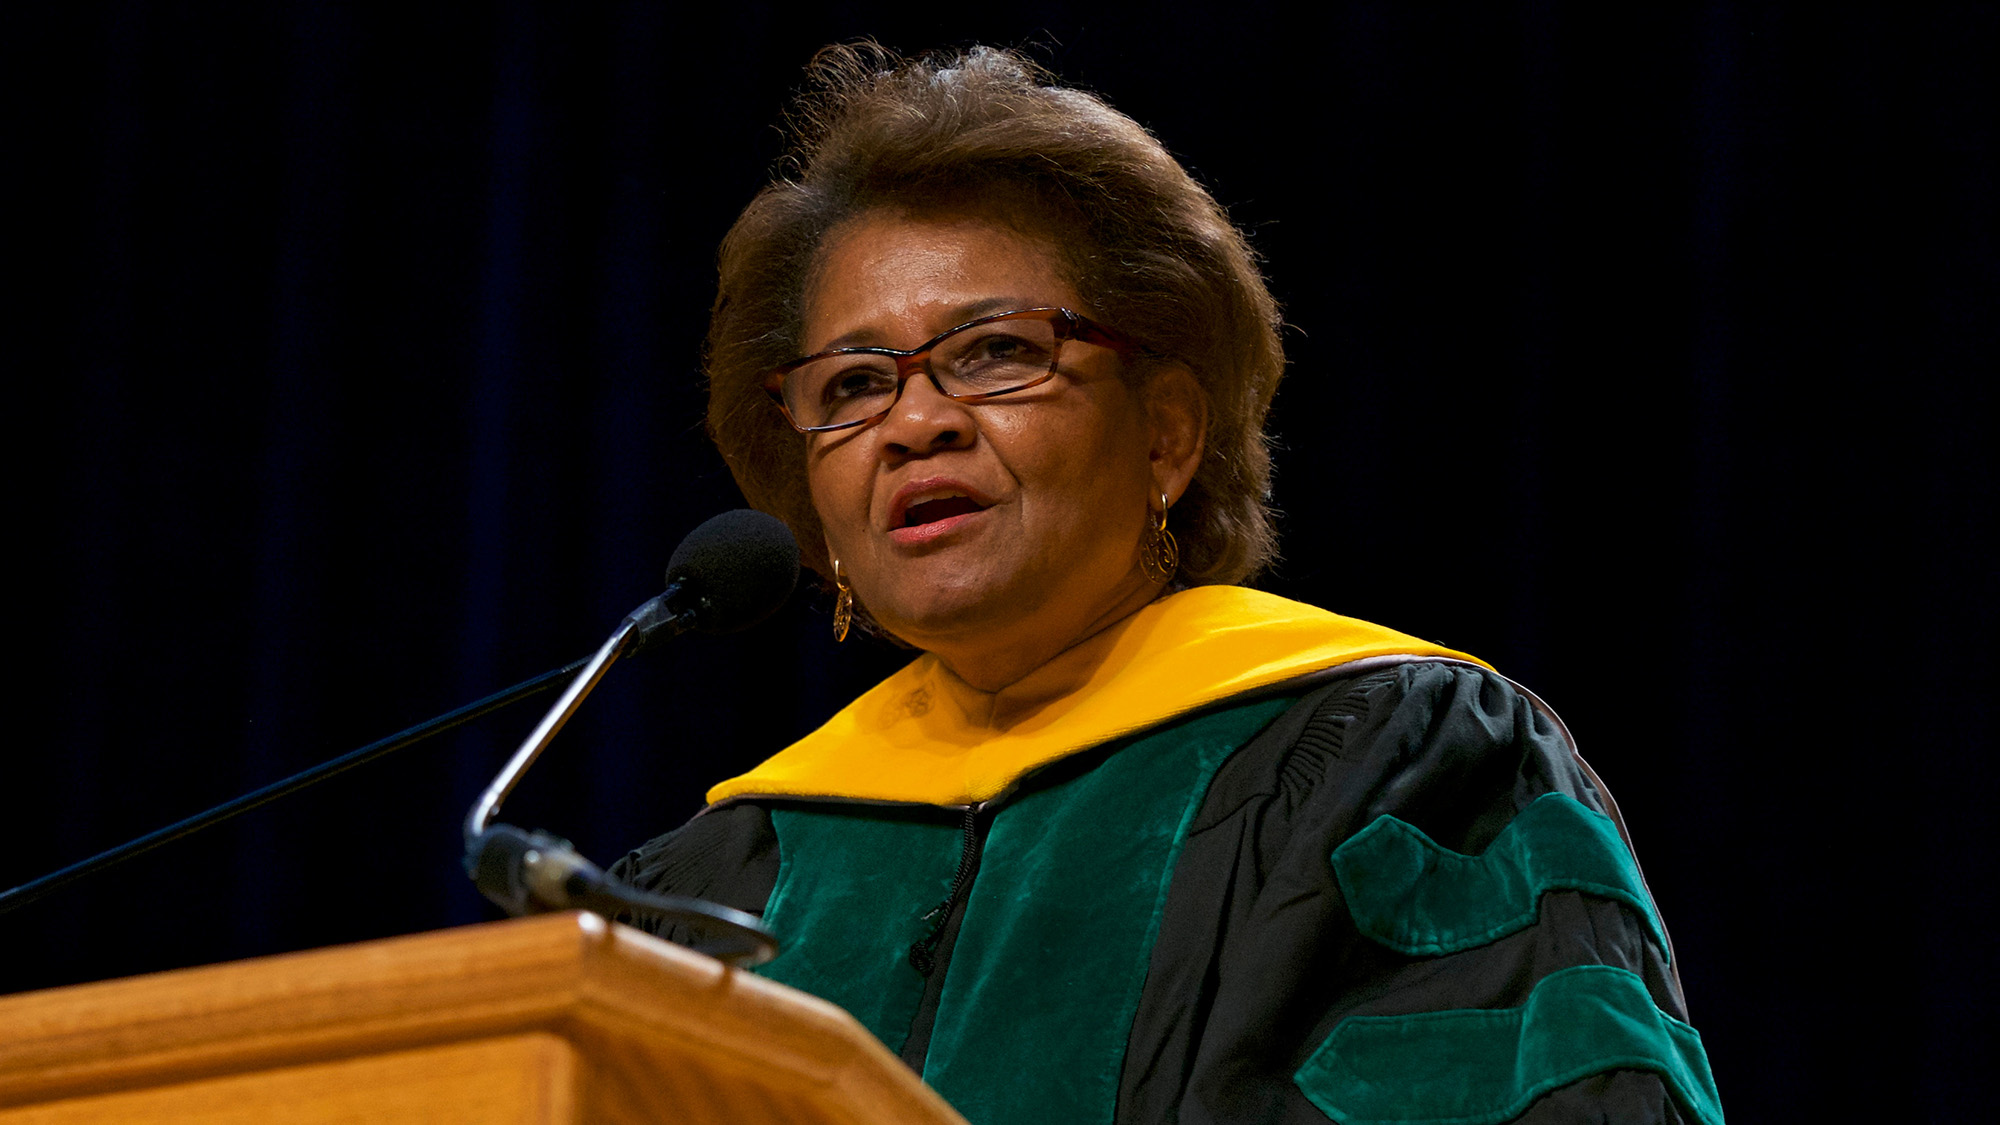 Dr. McCaskill-Stevens speaks at a podium during commencement